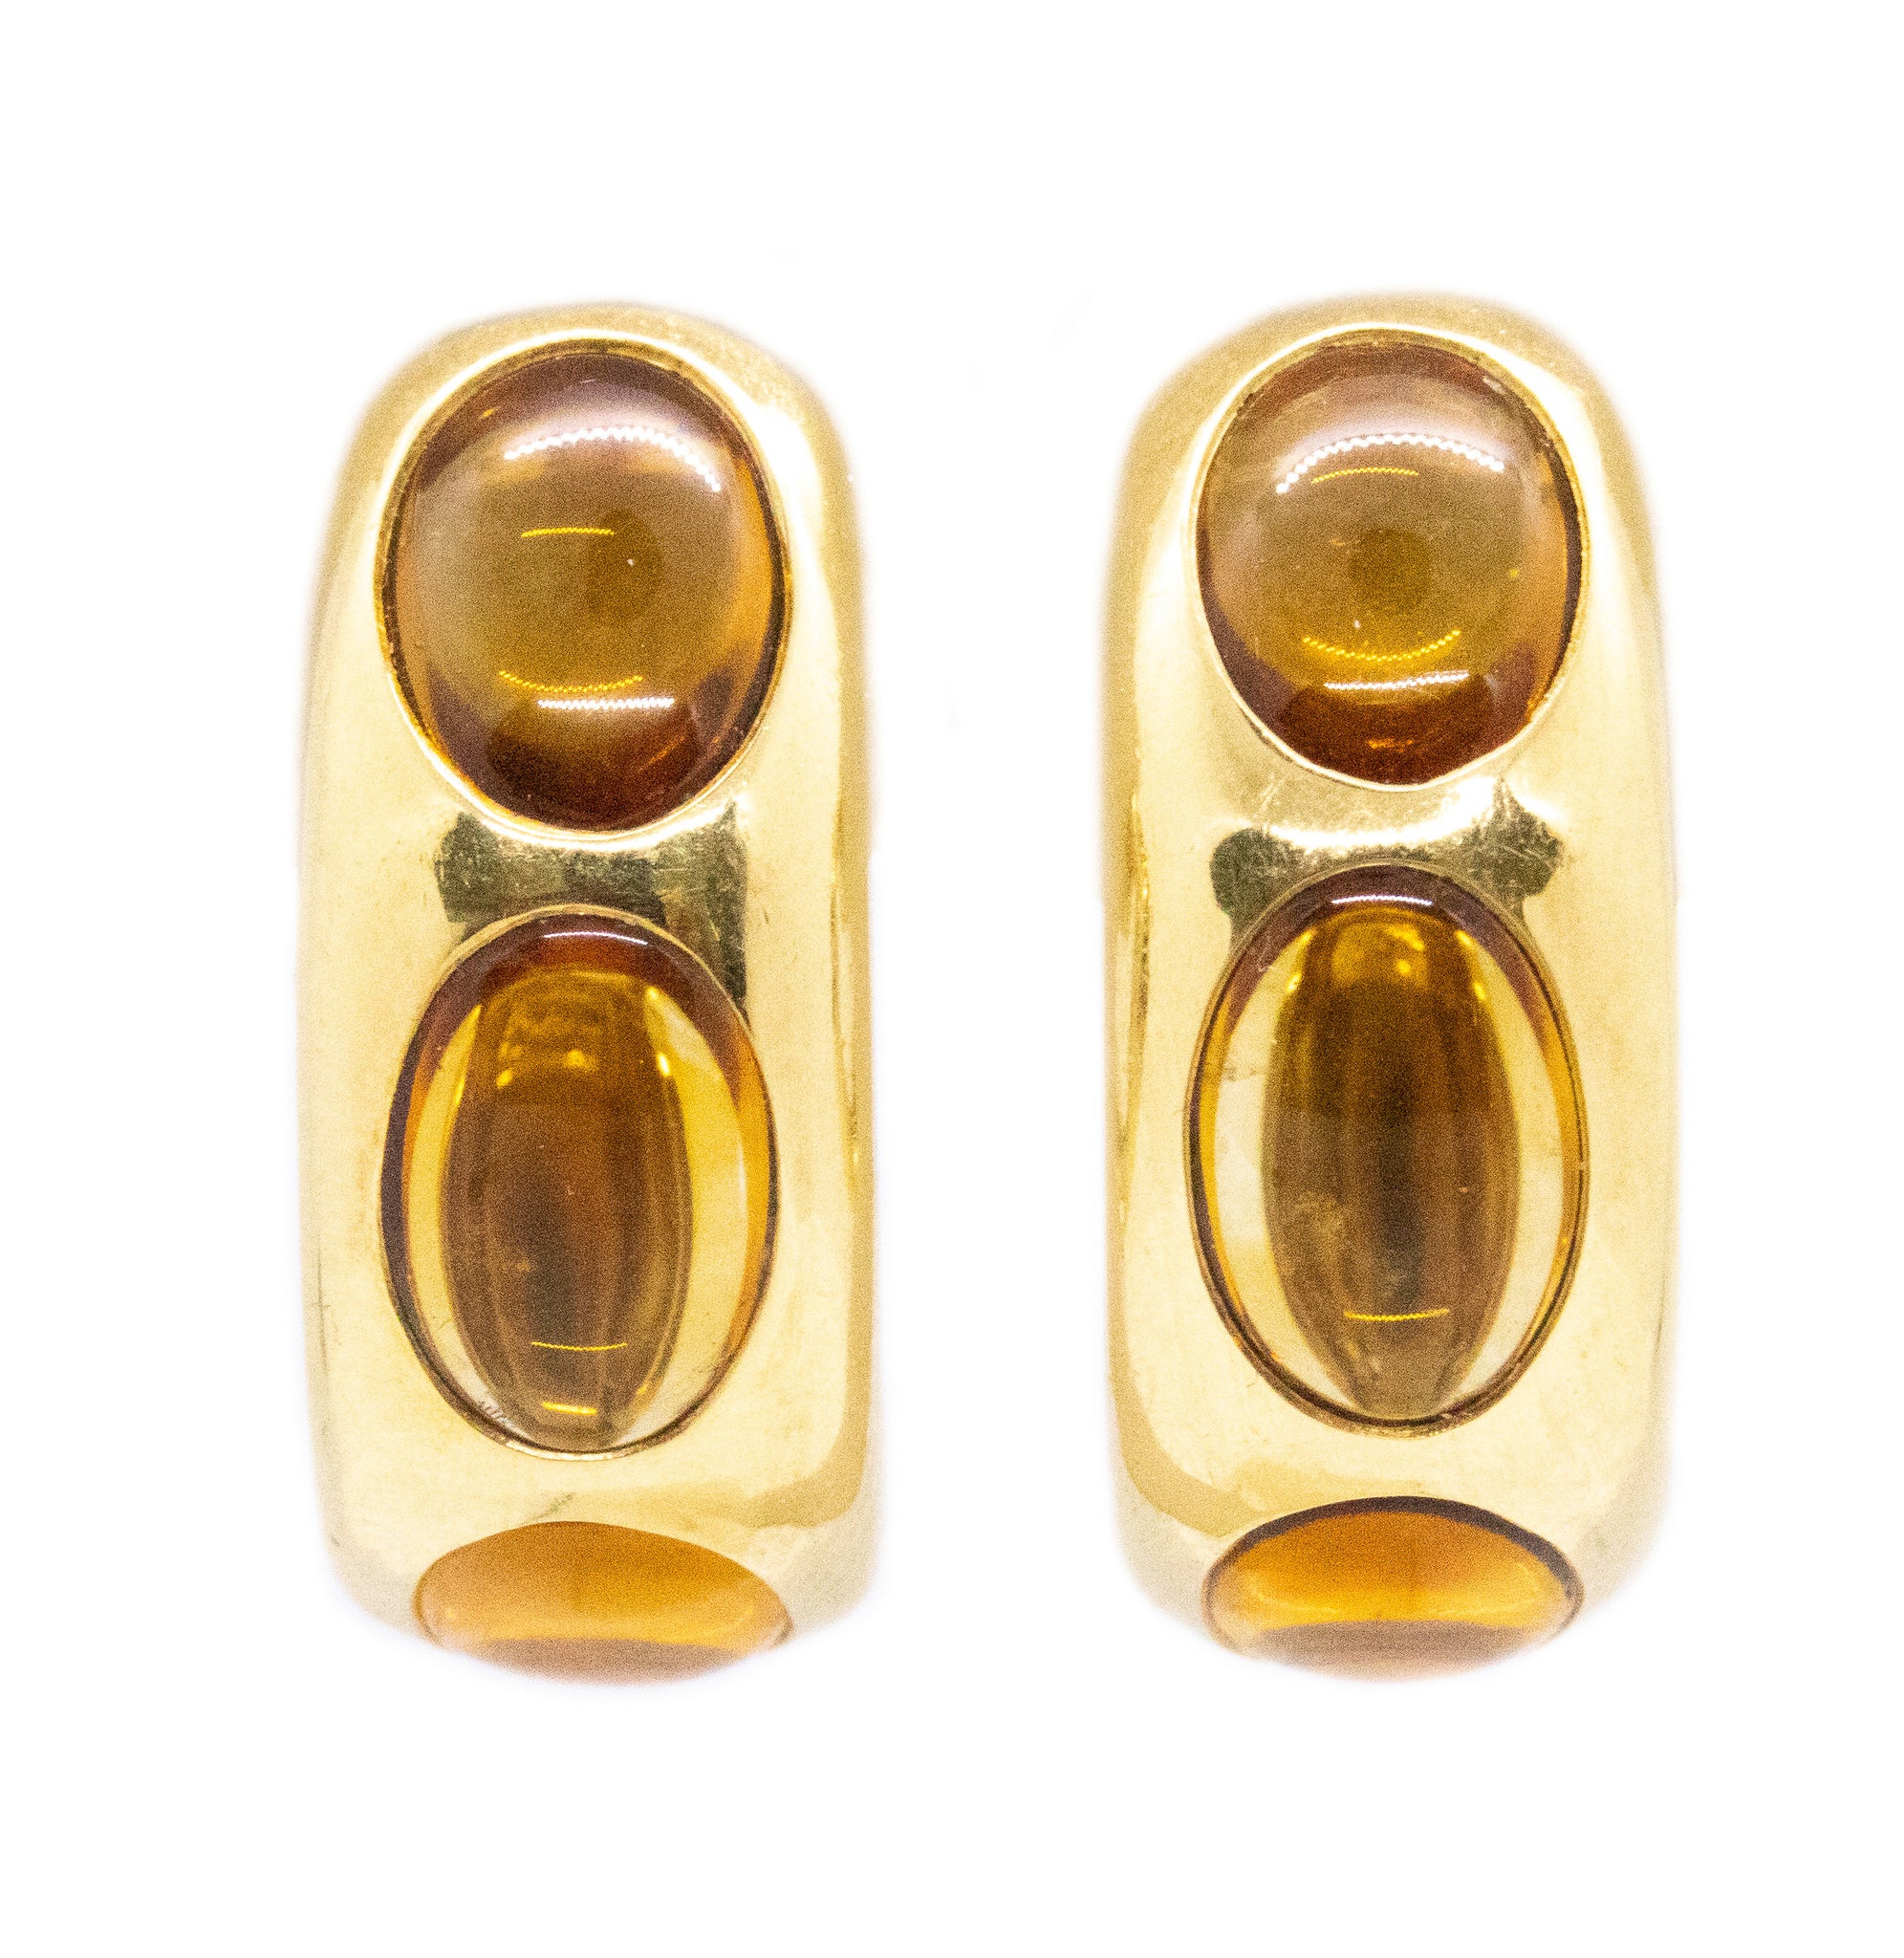 POMELLATO ITALY 18 KT HUGGIE HOOP EARRINGS WITH 12.06 Cts CITRINE CABOCHONS